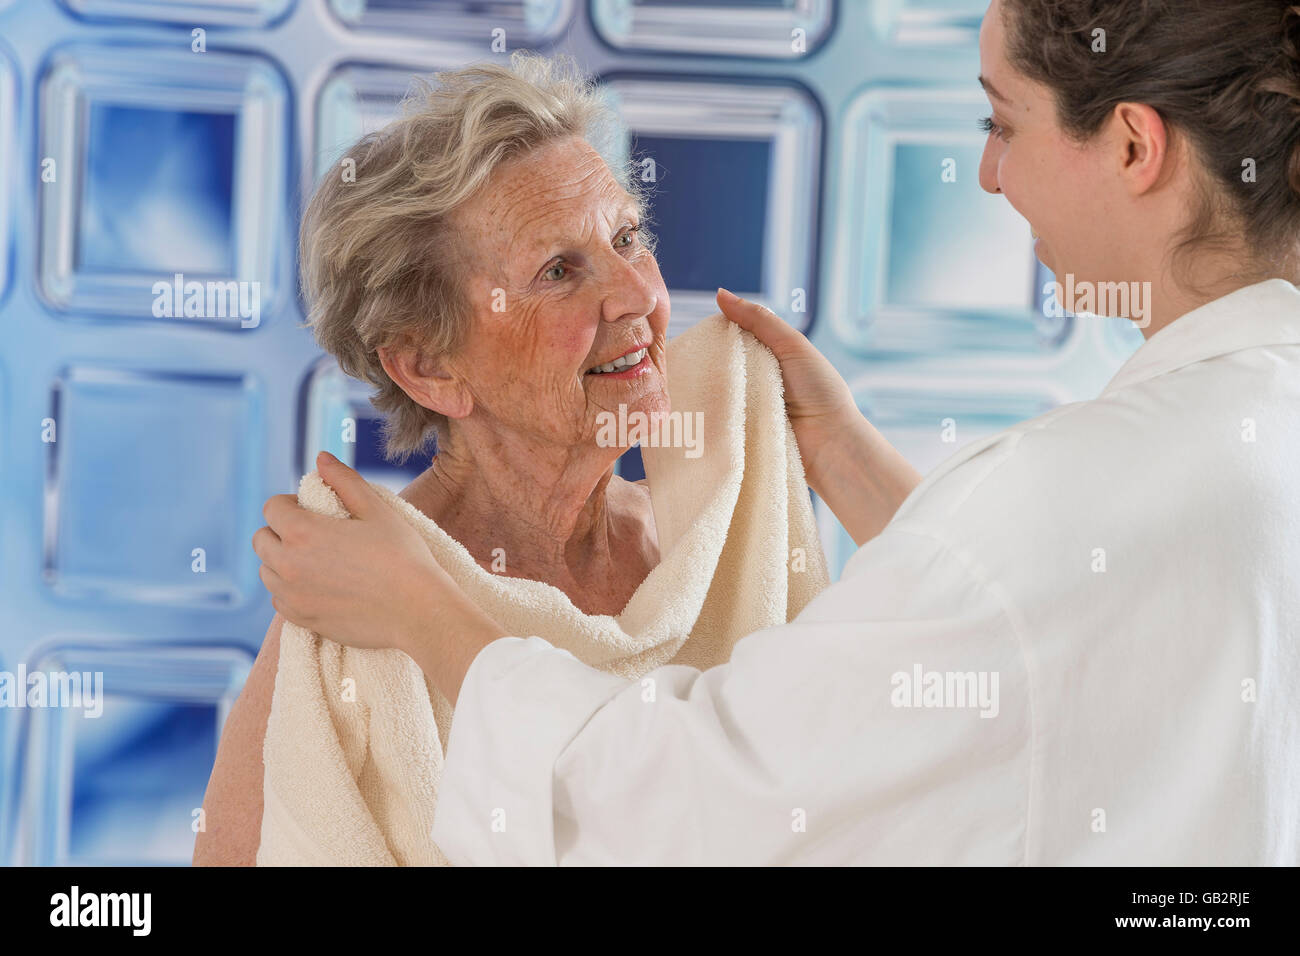 Care giver or nurse assisting elderly woman for shower Stock Photo